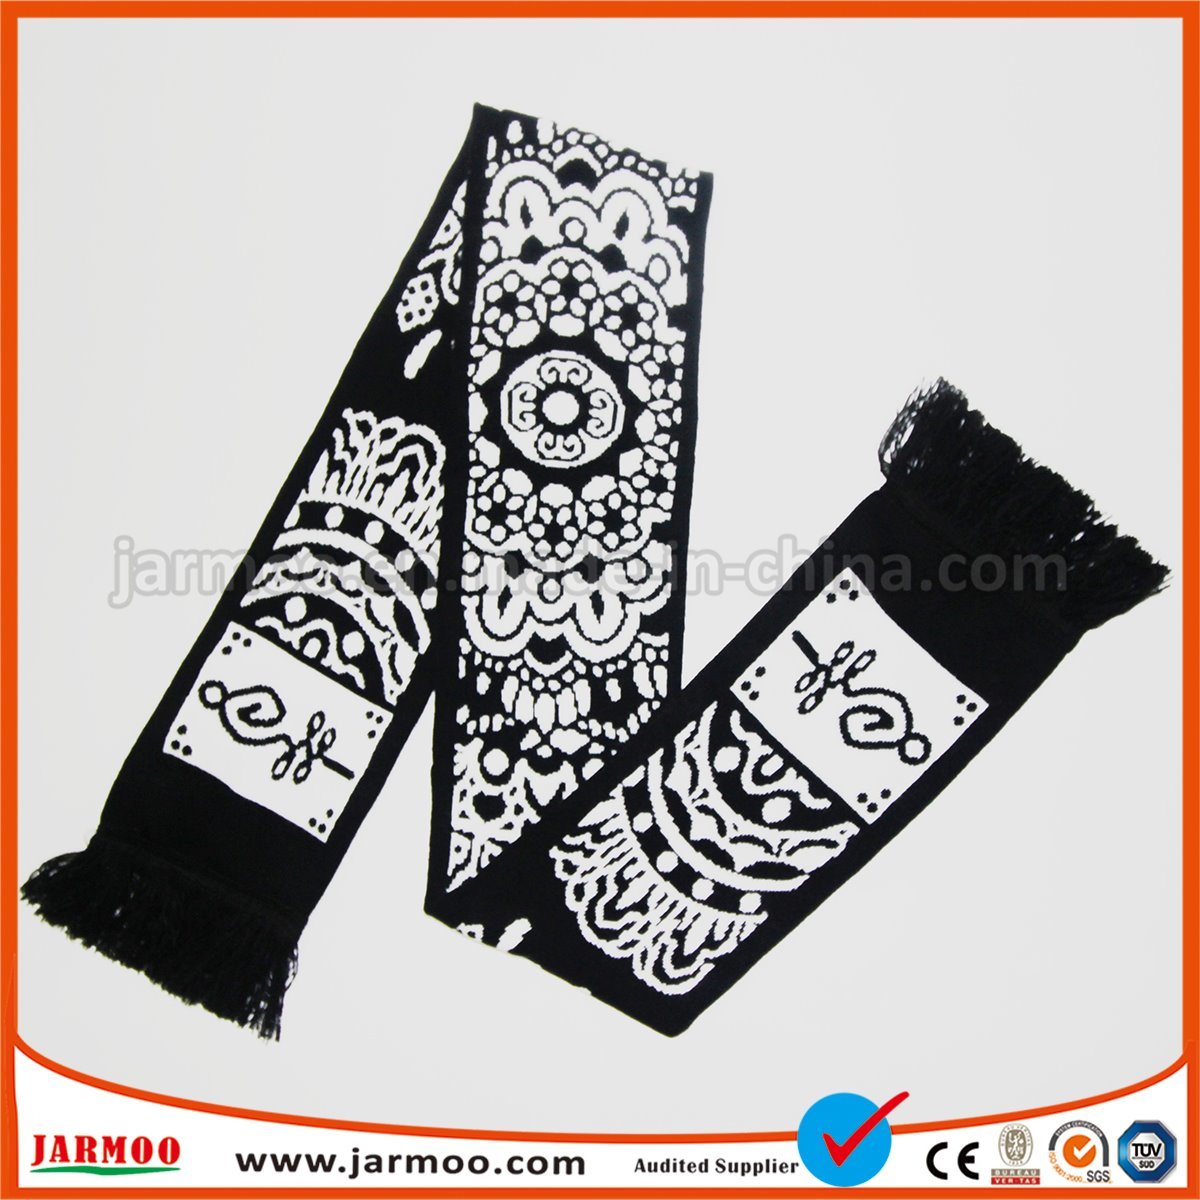 Promotional Double Layer Jacuard Acrylic Football Scarf with Tassels